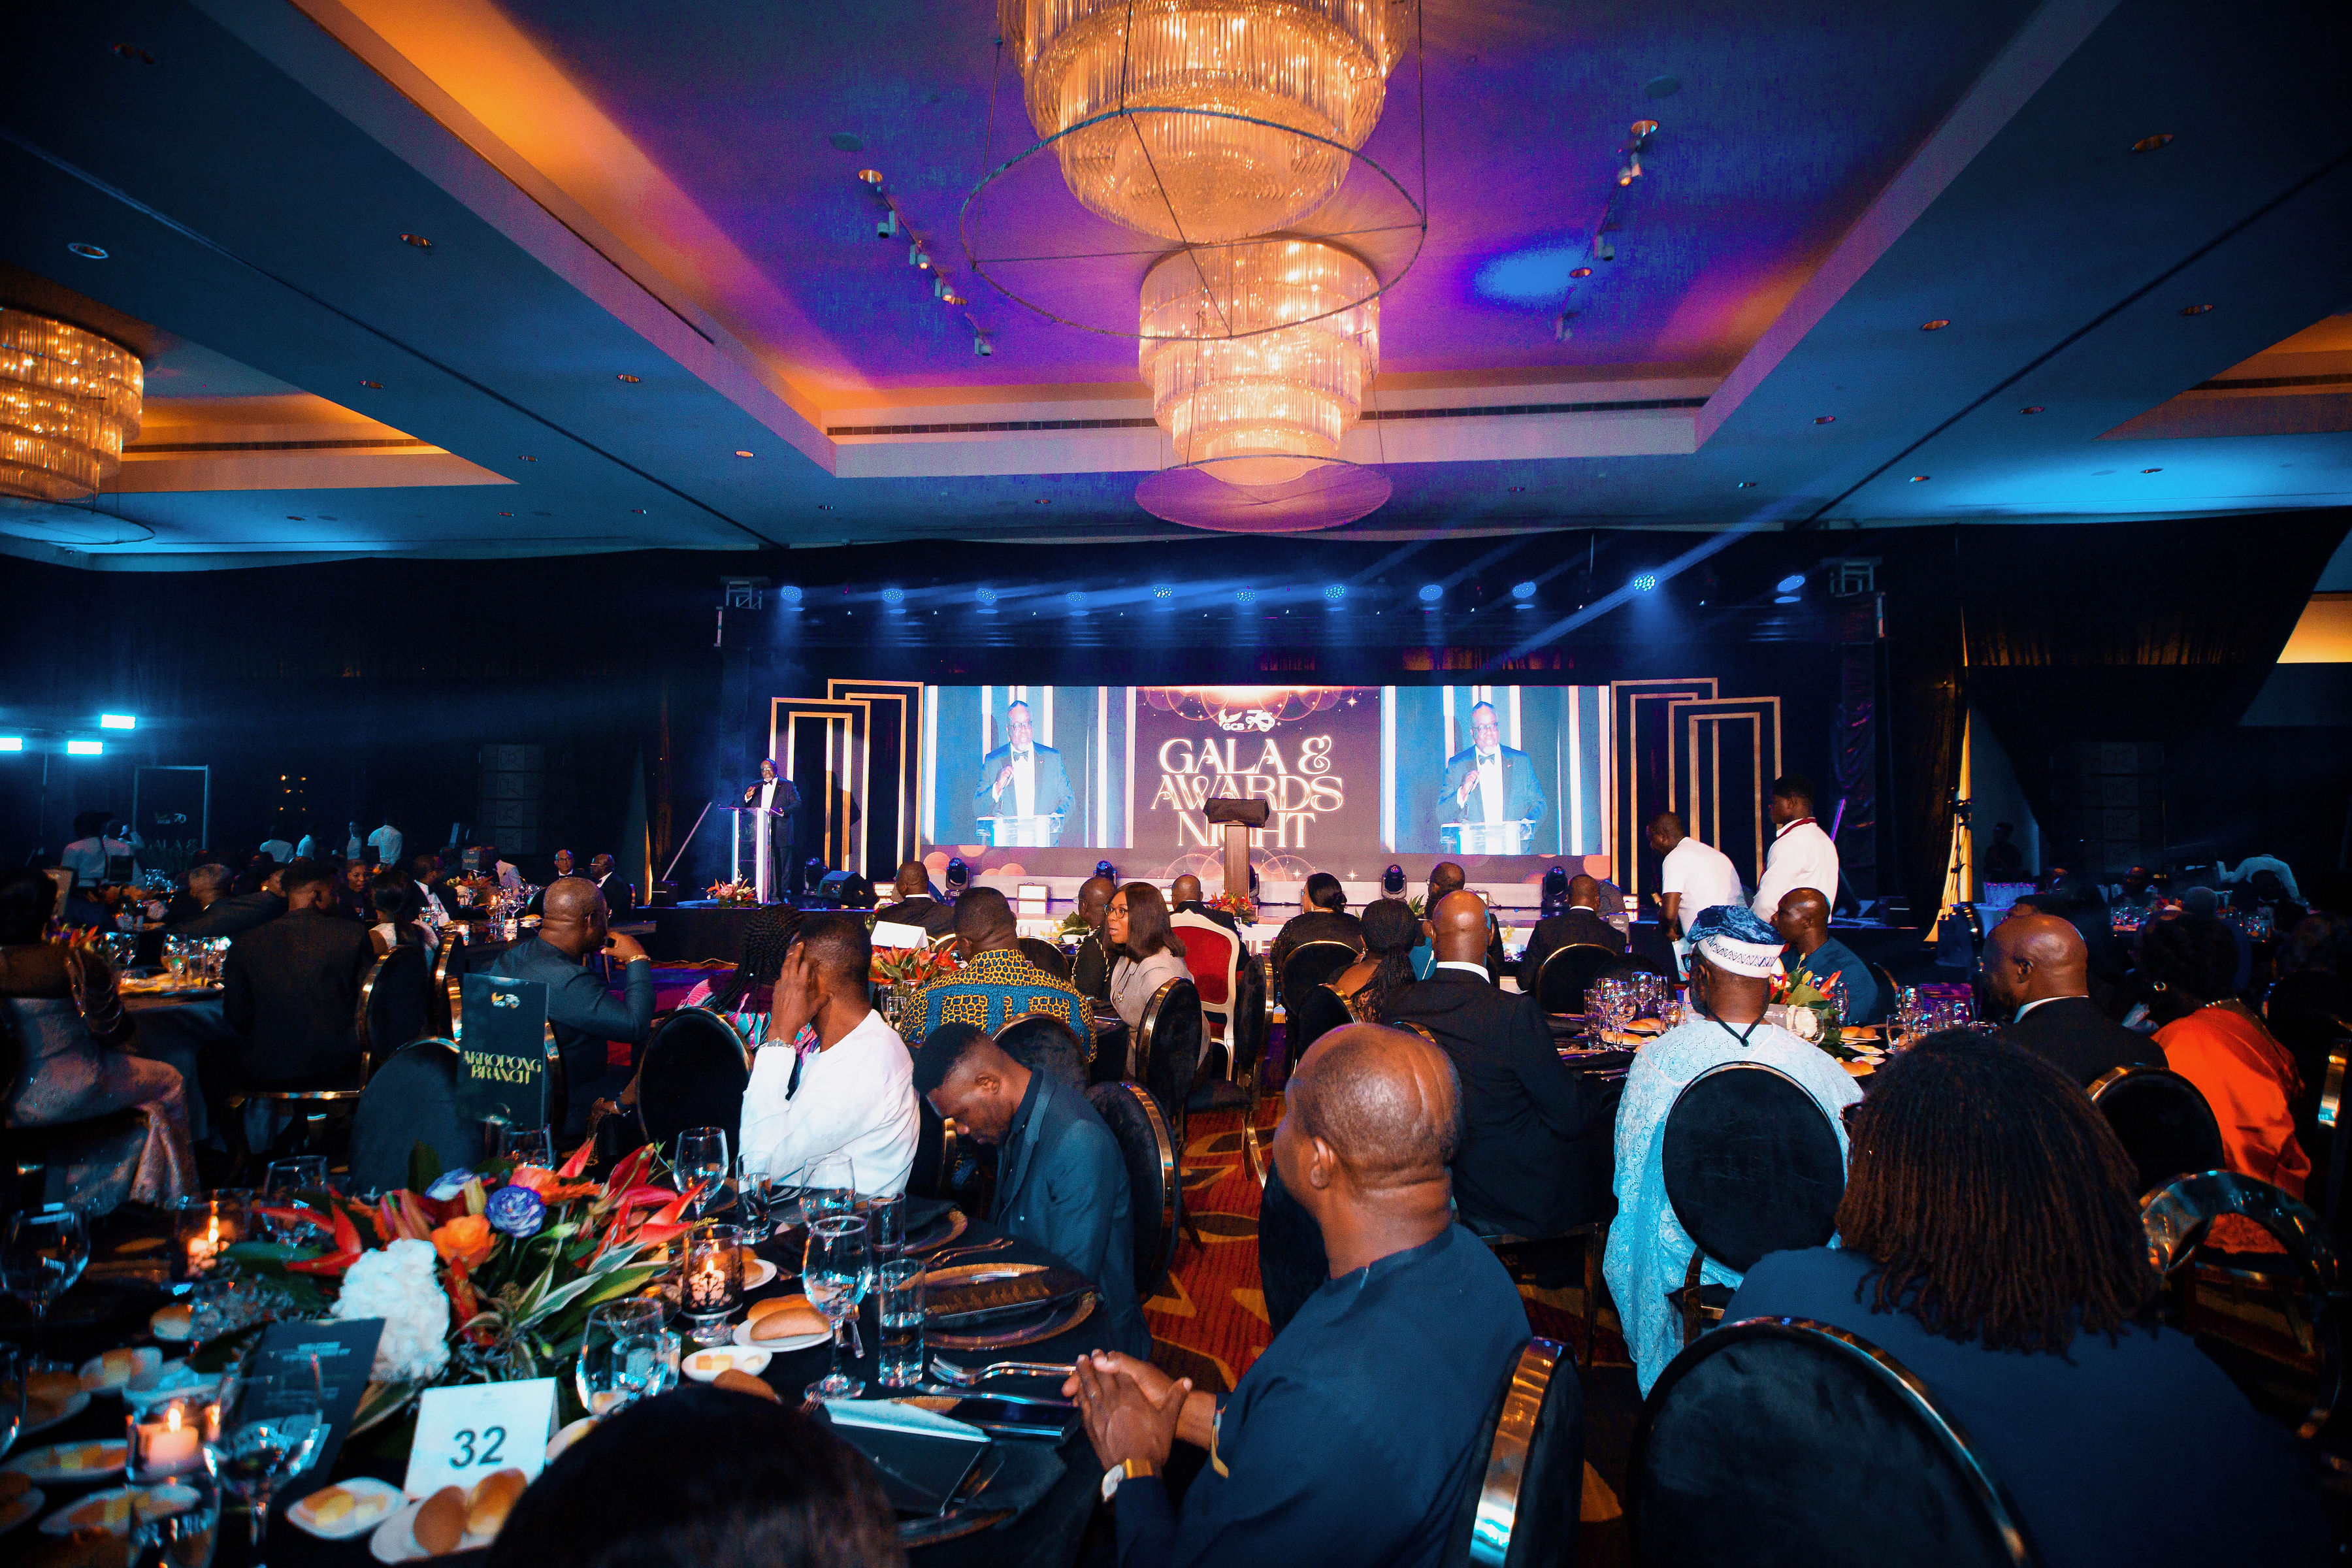 GCB Hosts A Gala & Awards Night To Celebrate 70 Years Of Unrivalled Banking 